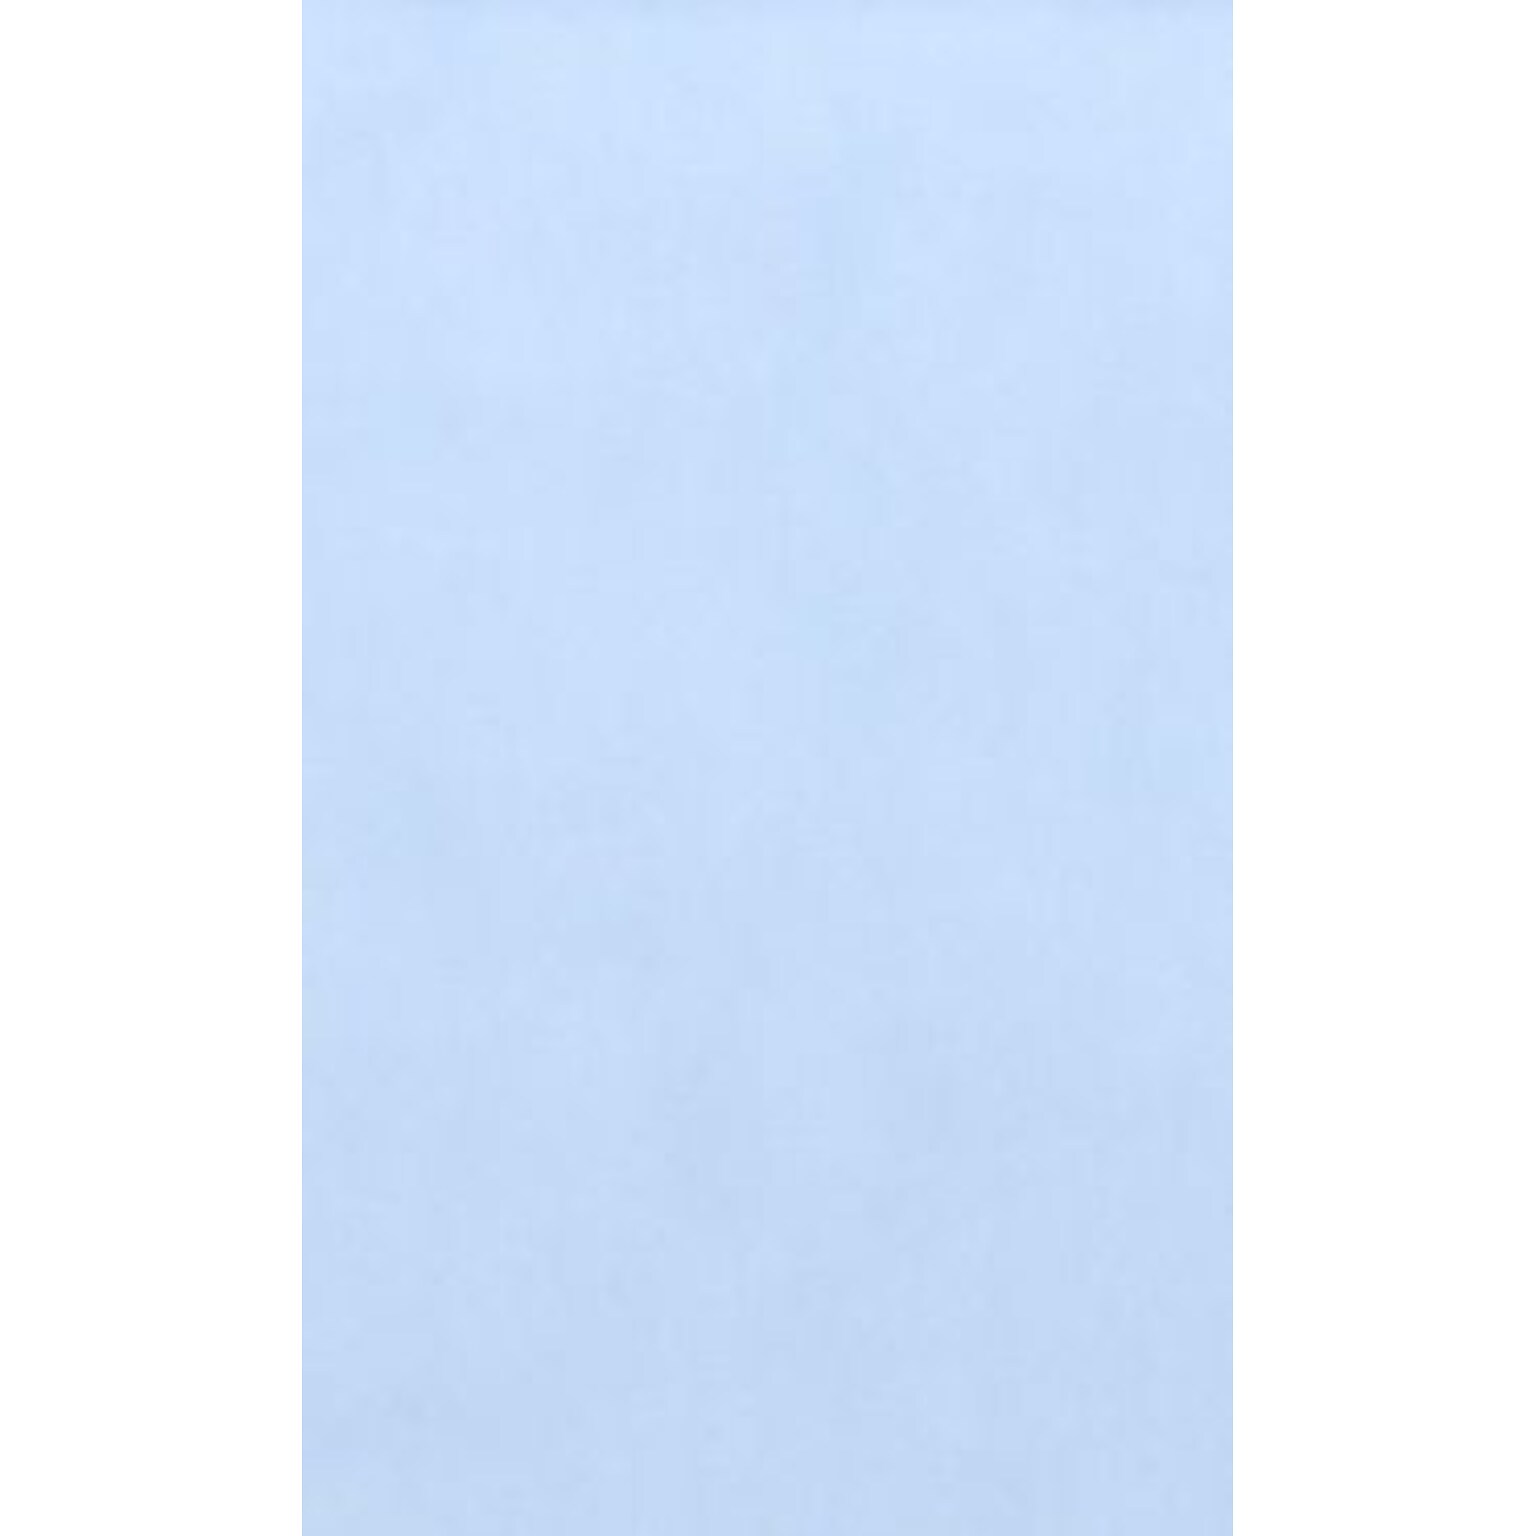 LUX Colored Paper, 32 lbs., 8.5 x 14, Baby Blue, 50 Sheets/Pack (81214-P-13-50)